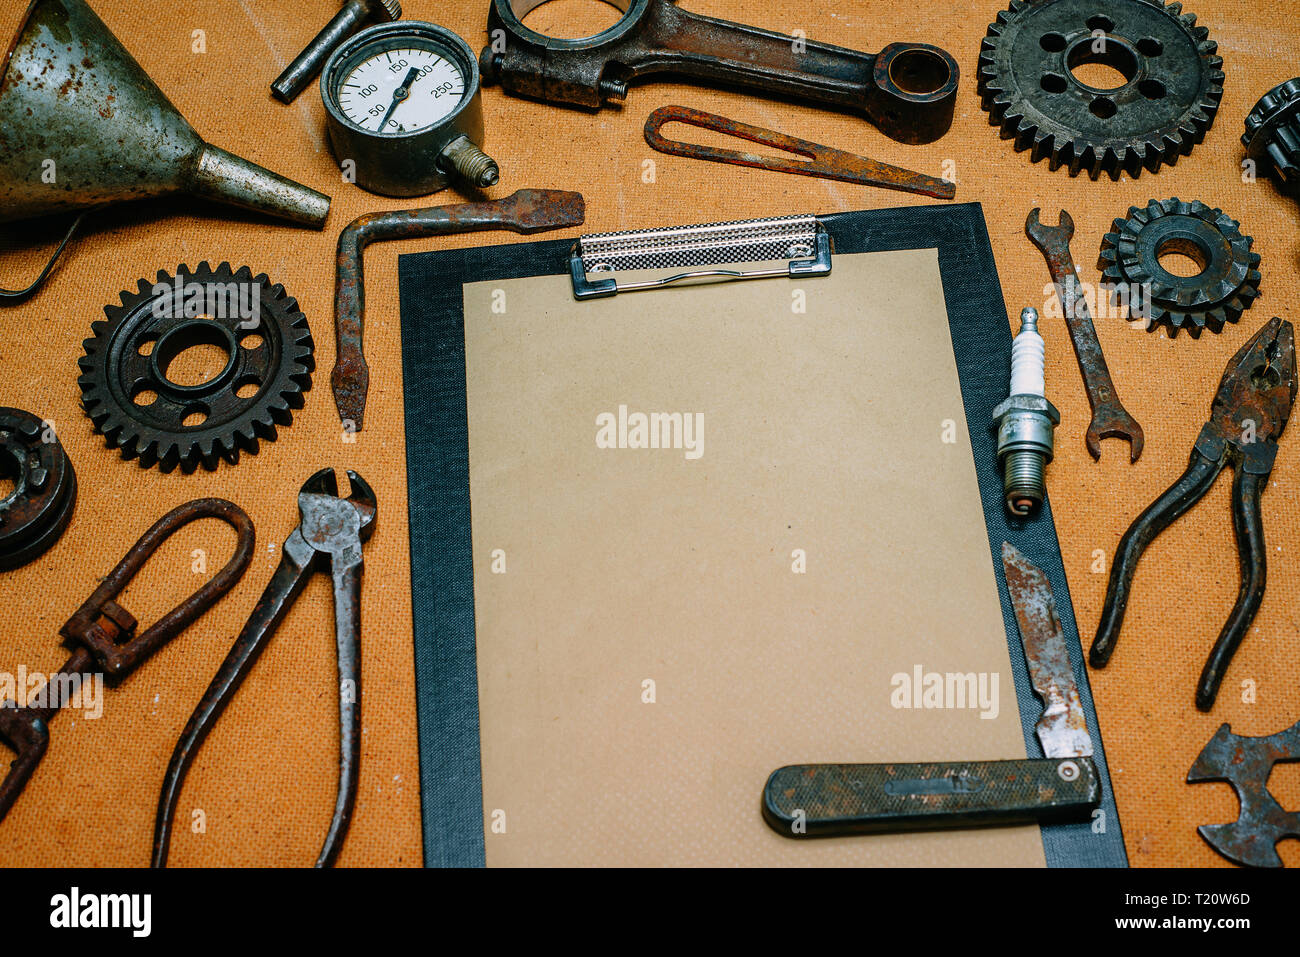 Clipboard with paper for your info in the center of rusty tools, gears on vintage fiberboard background. Motorcycle equipment and repair template. Stock Photo